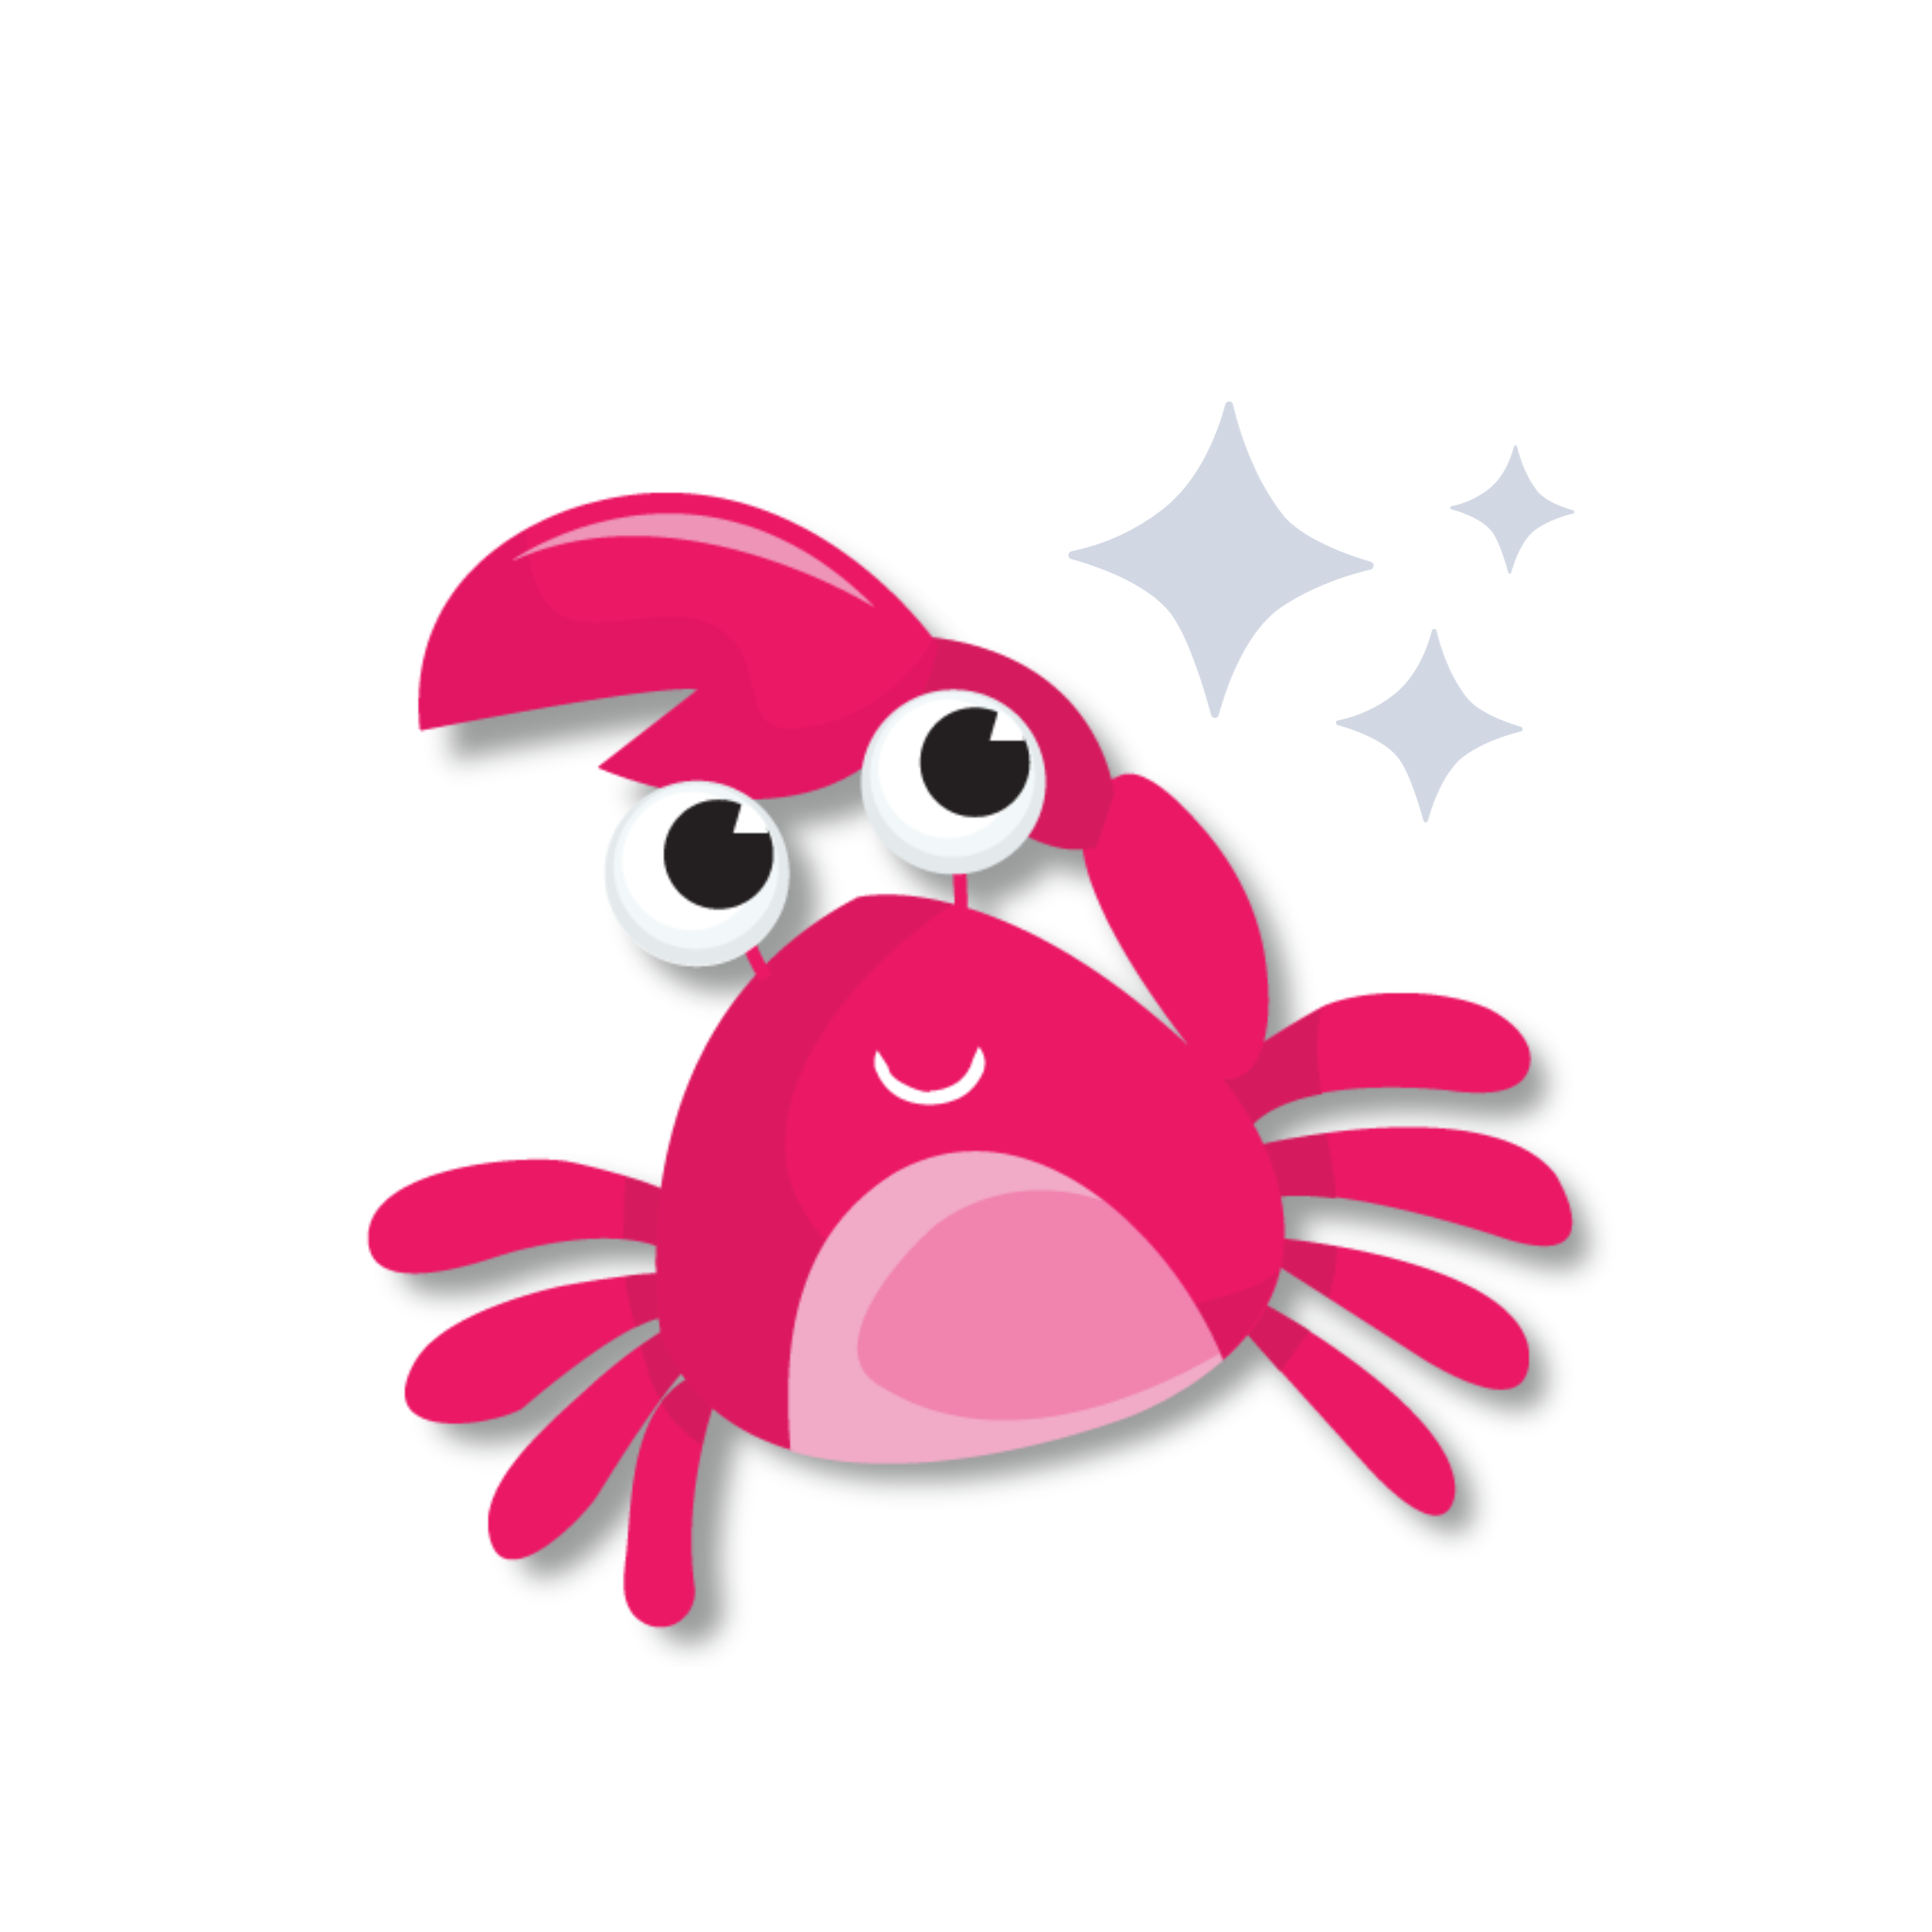 Image of cartoon pink crab with grey stars in top right corner